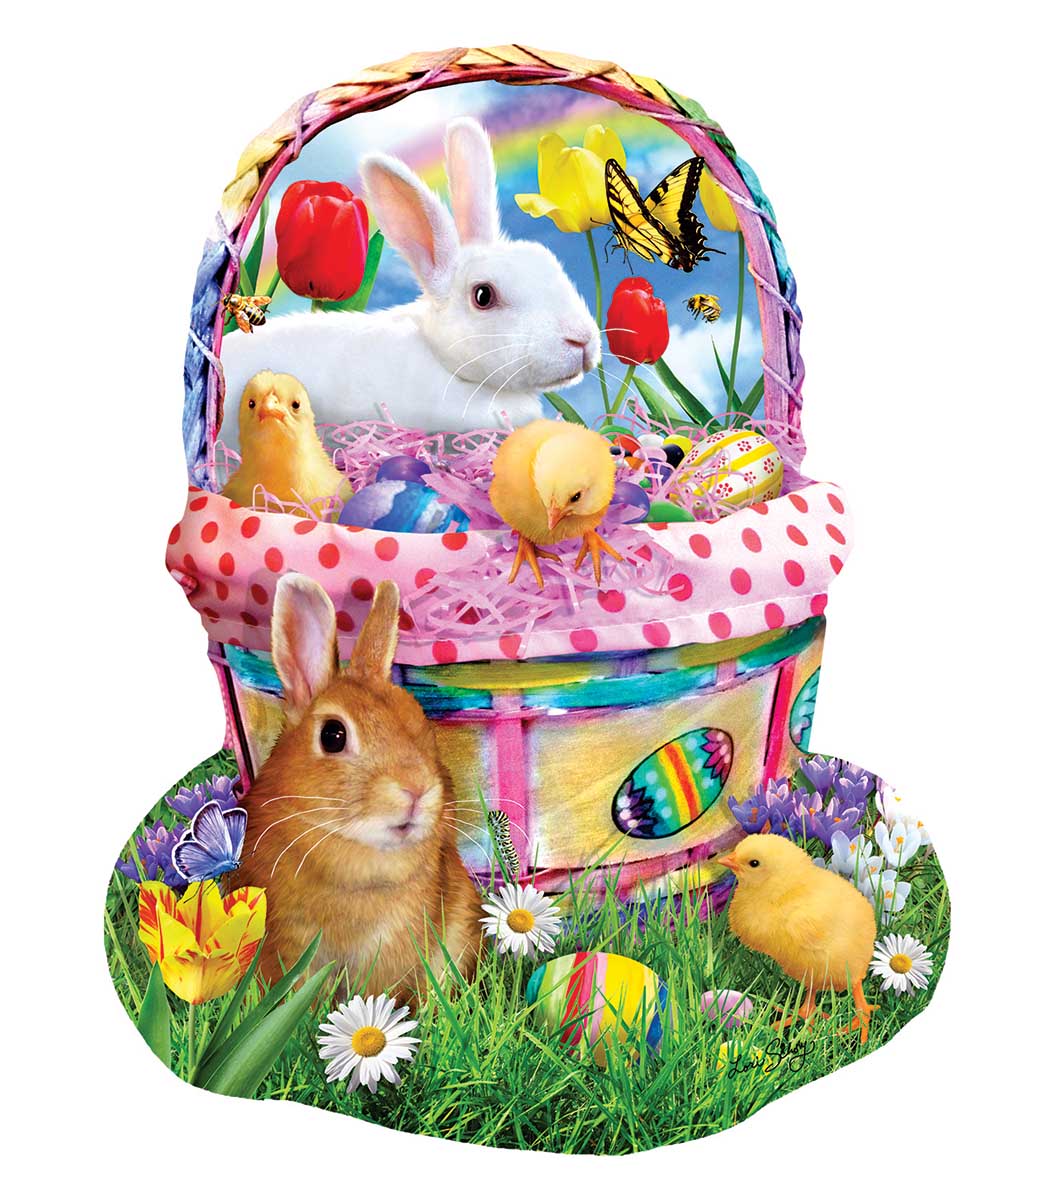 Bunny's Easter Basket Animals Shaped Puzzle